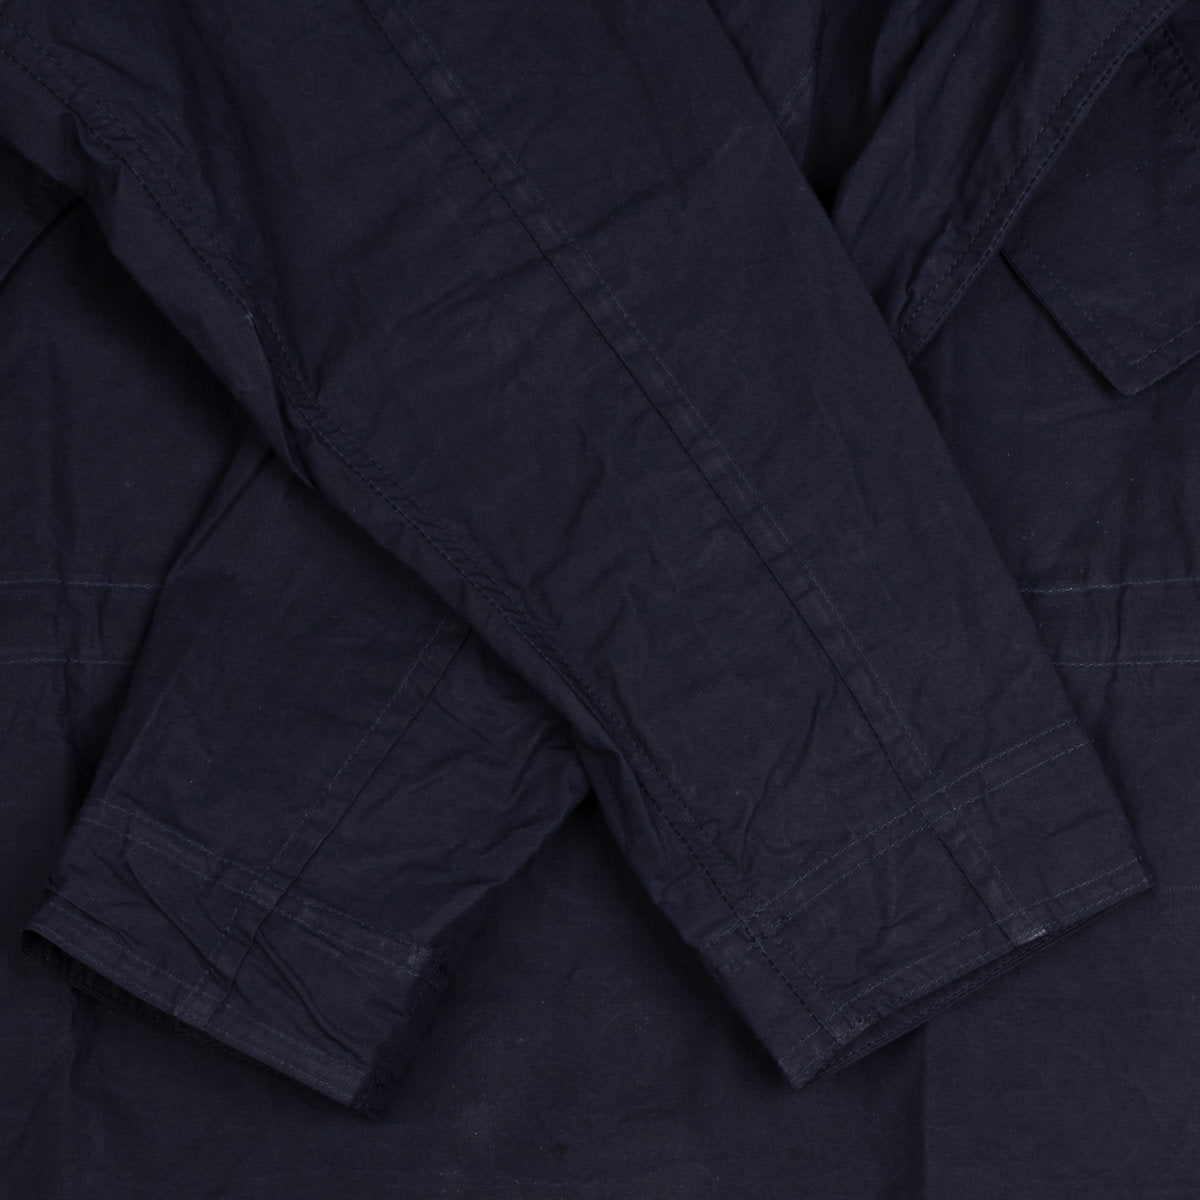 The Hooded Smock - Navy